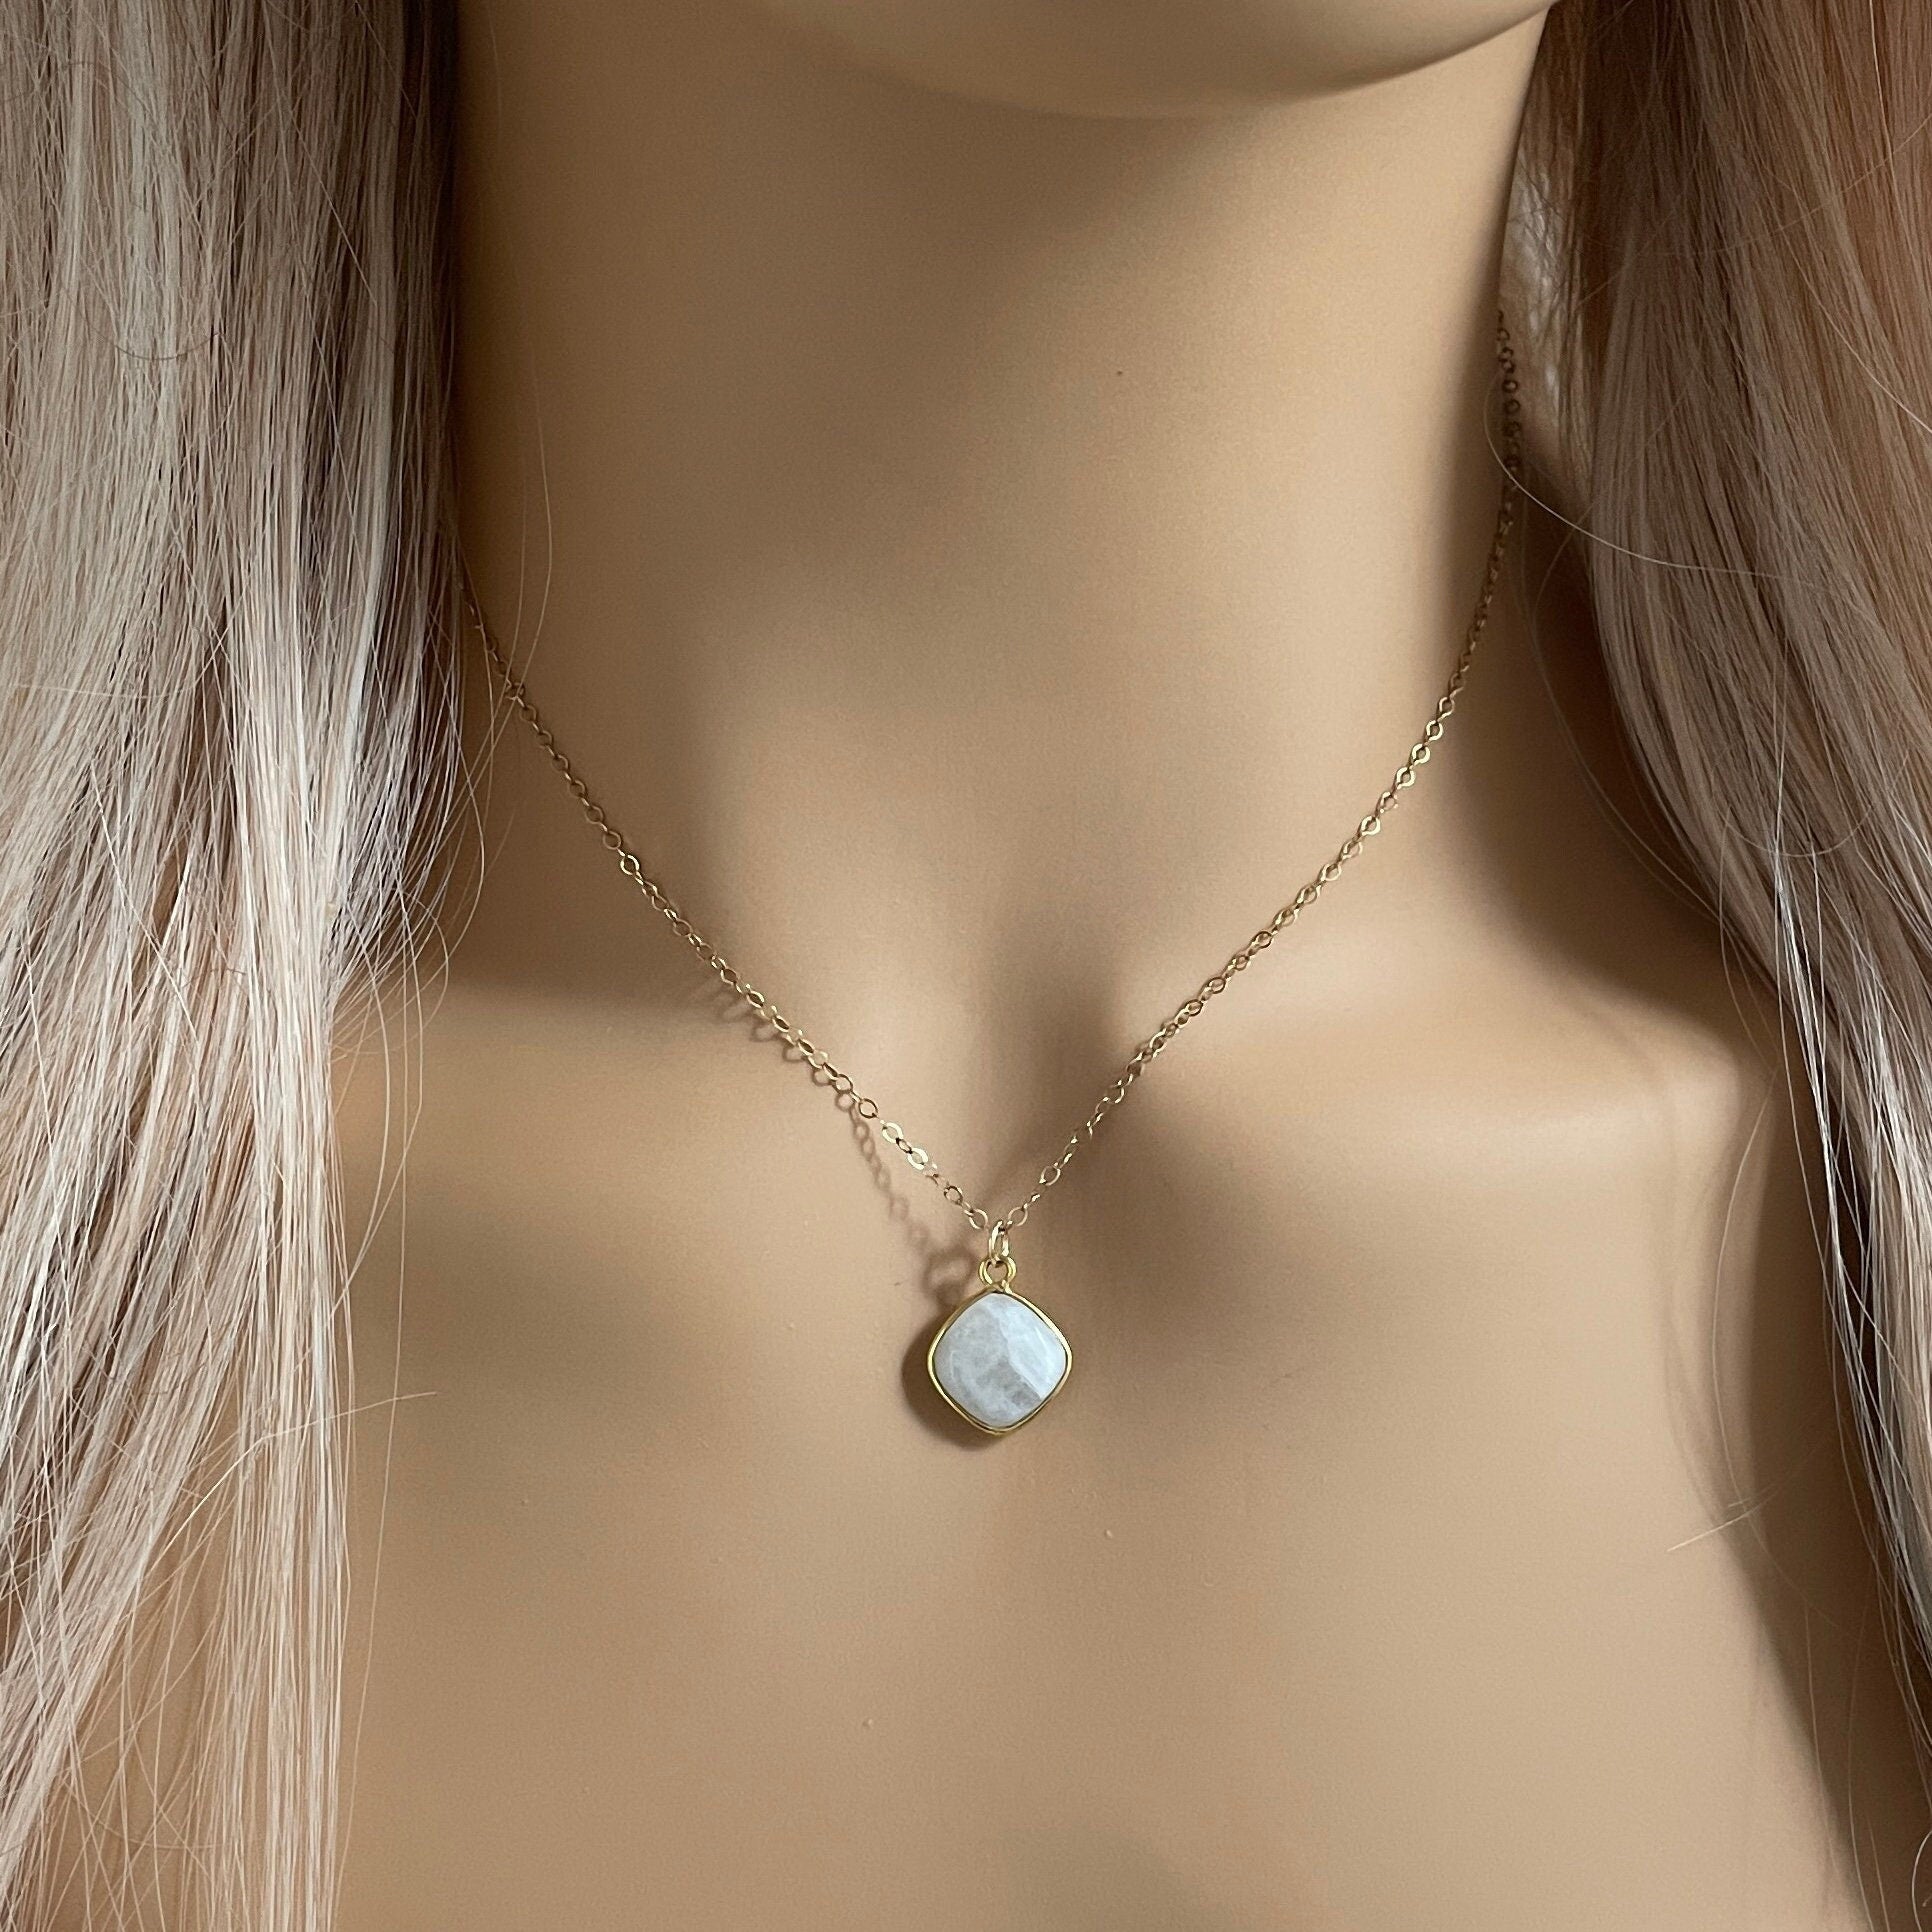 Valentines Day Gift, White Moonstone Necklace with Personalized Initial Charm on 14K Gold Filled Chain, M3-06